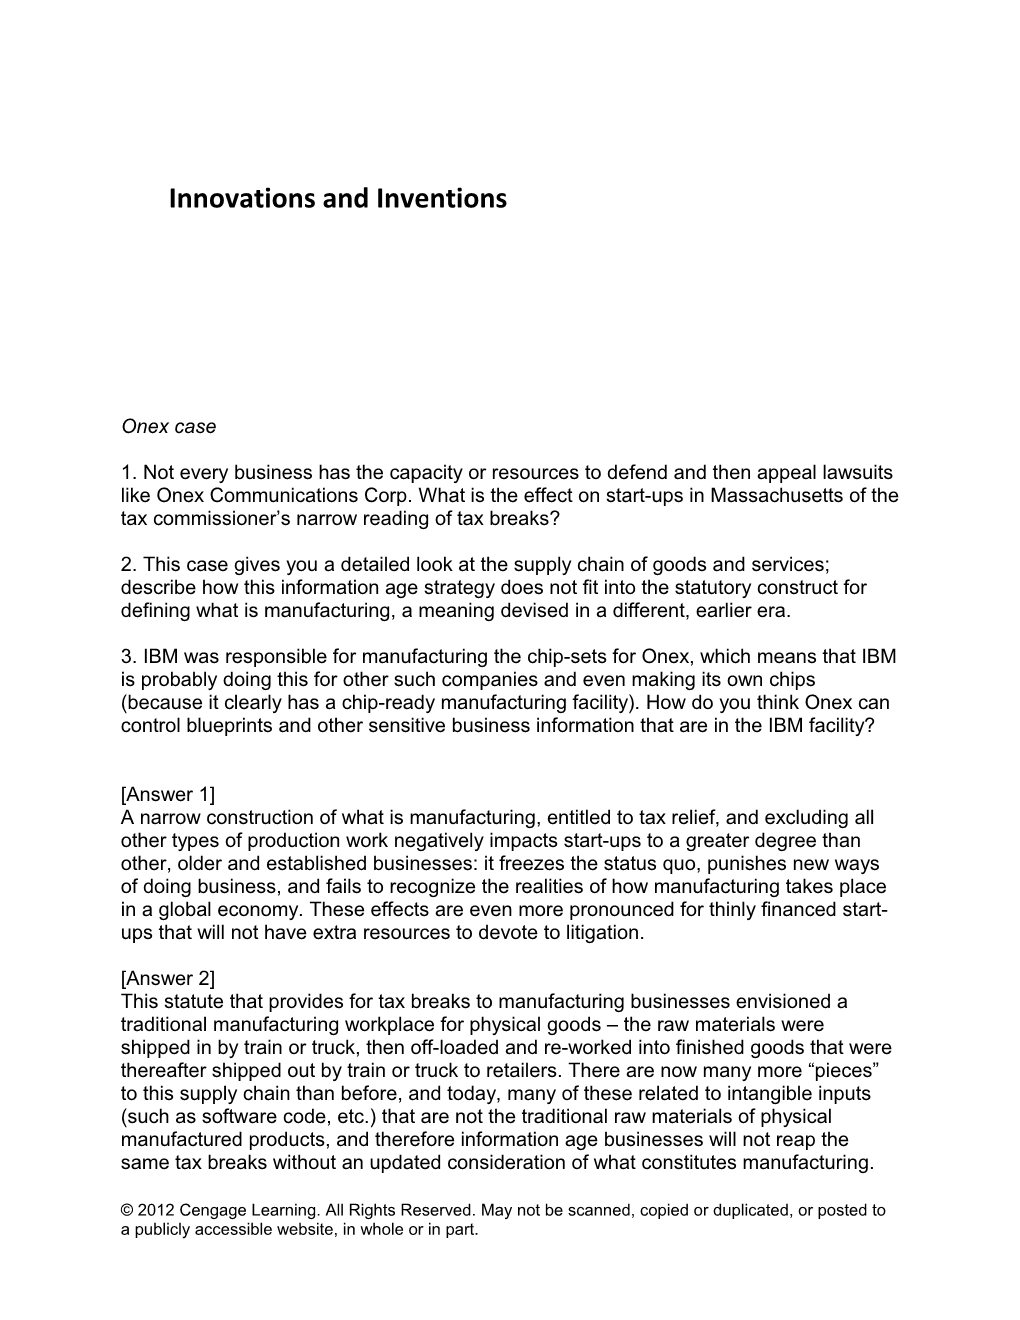 Ch 2: Innovations and Inventions Solutions Manual, Page 2